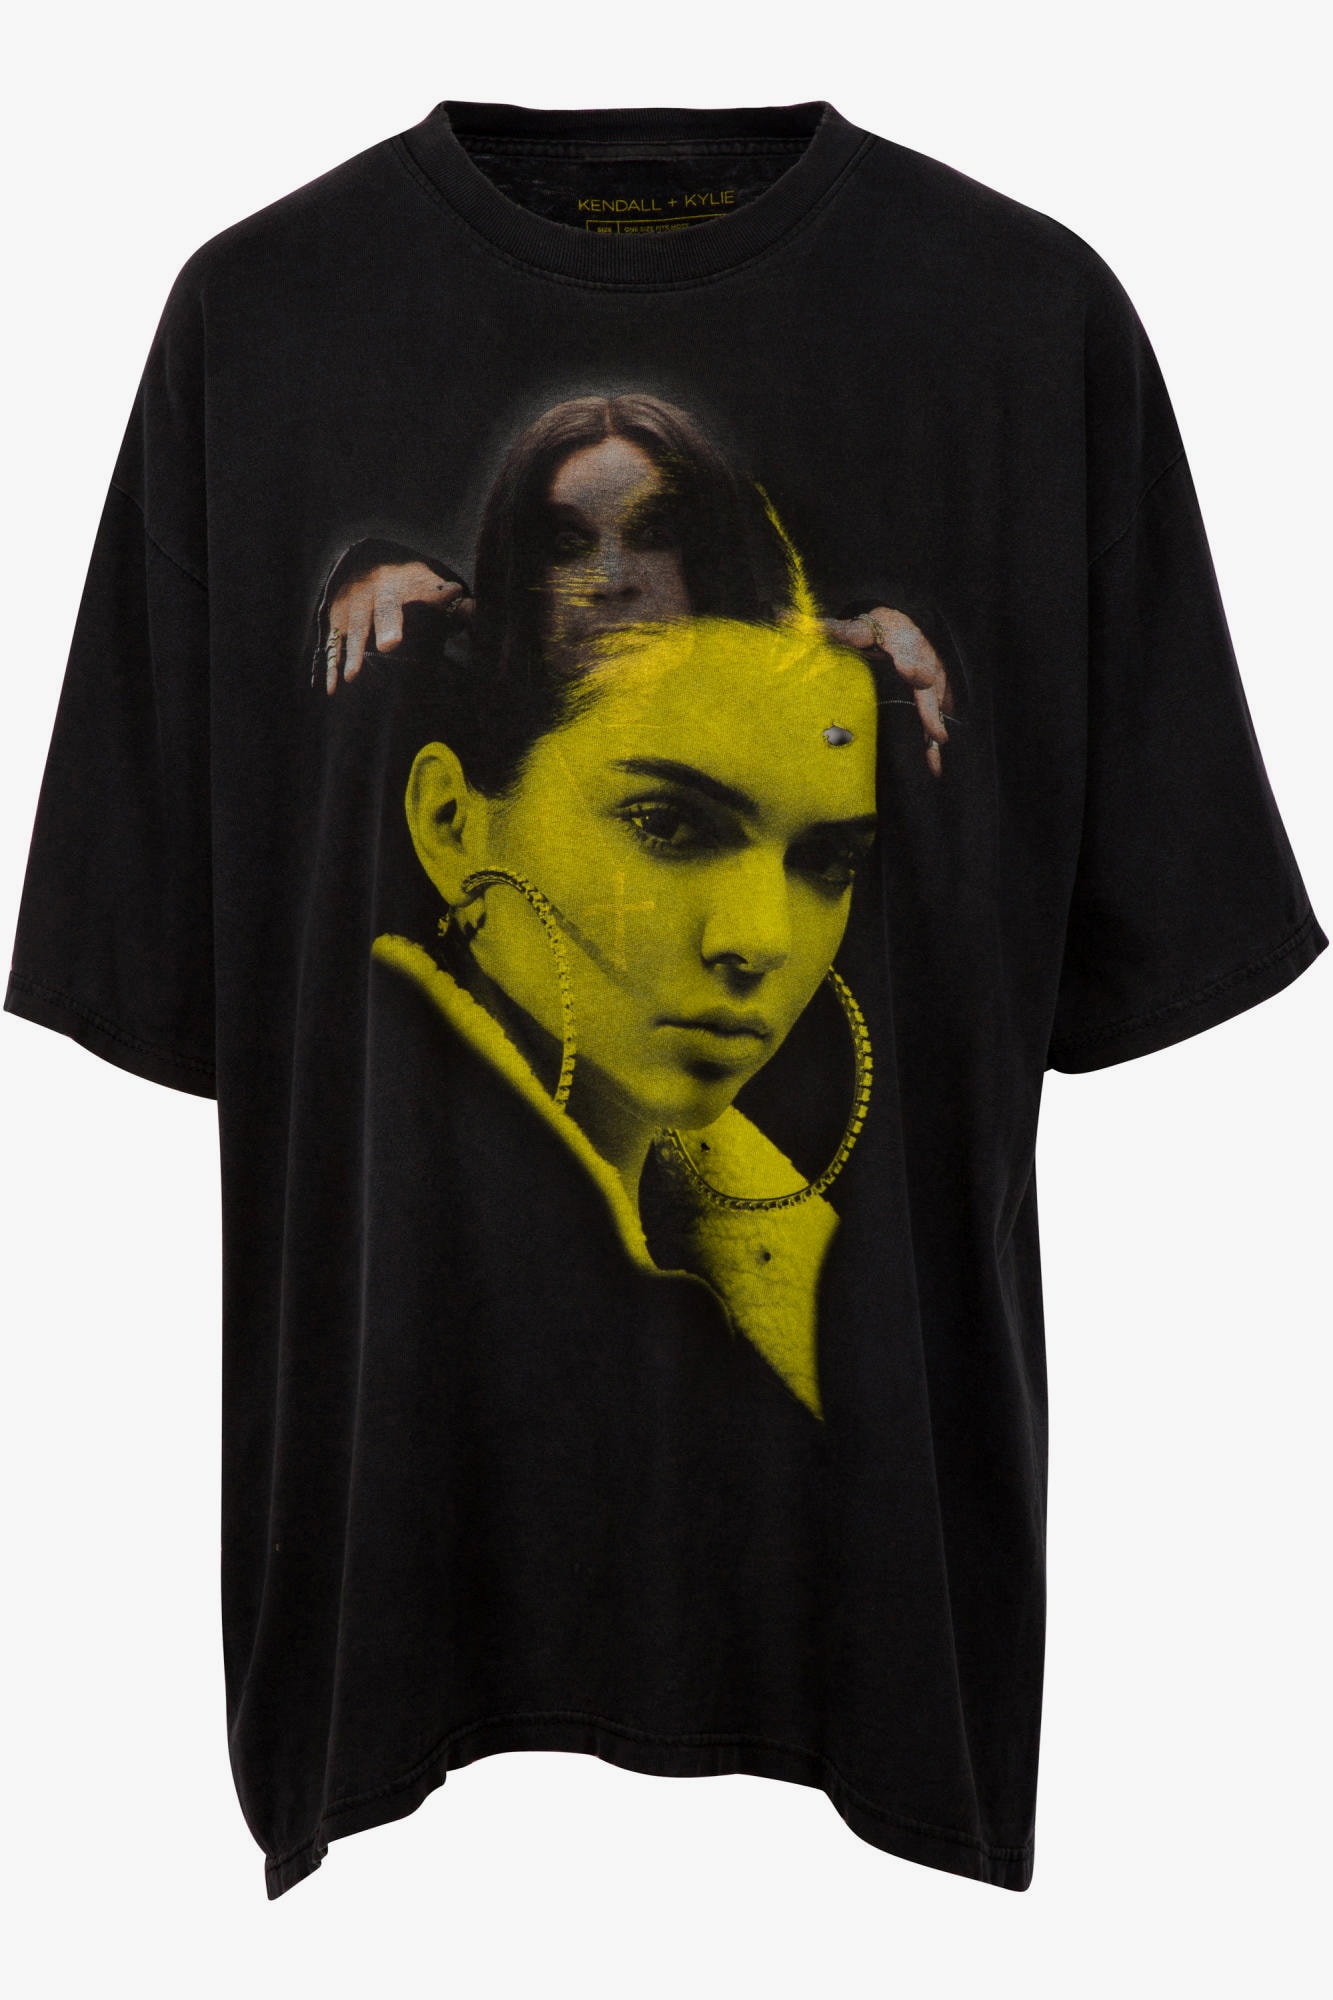 Kendall Kylie Jenner Vintage T-Shirt Collection Tupac Shakur Biggie Smalls Pink Floyd The Doors Apparel Clothing Controversy